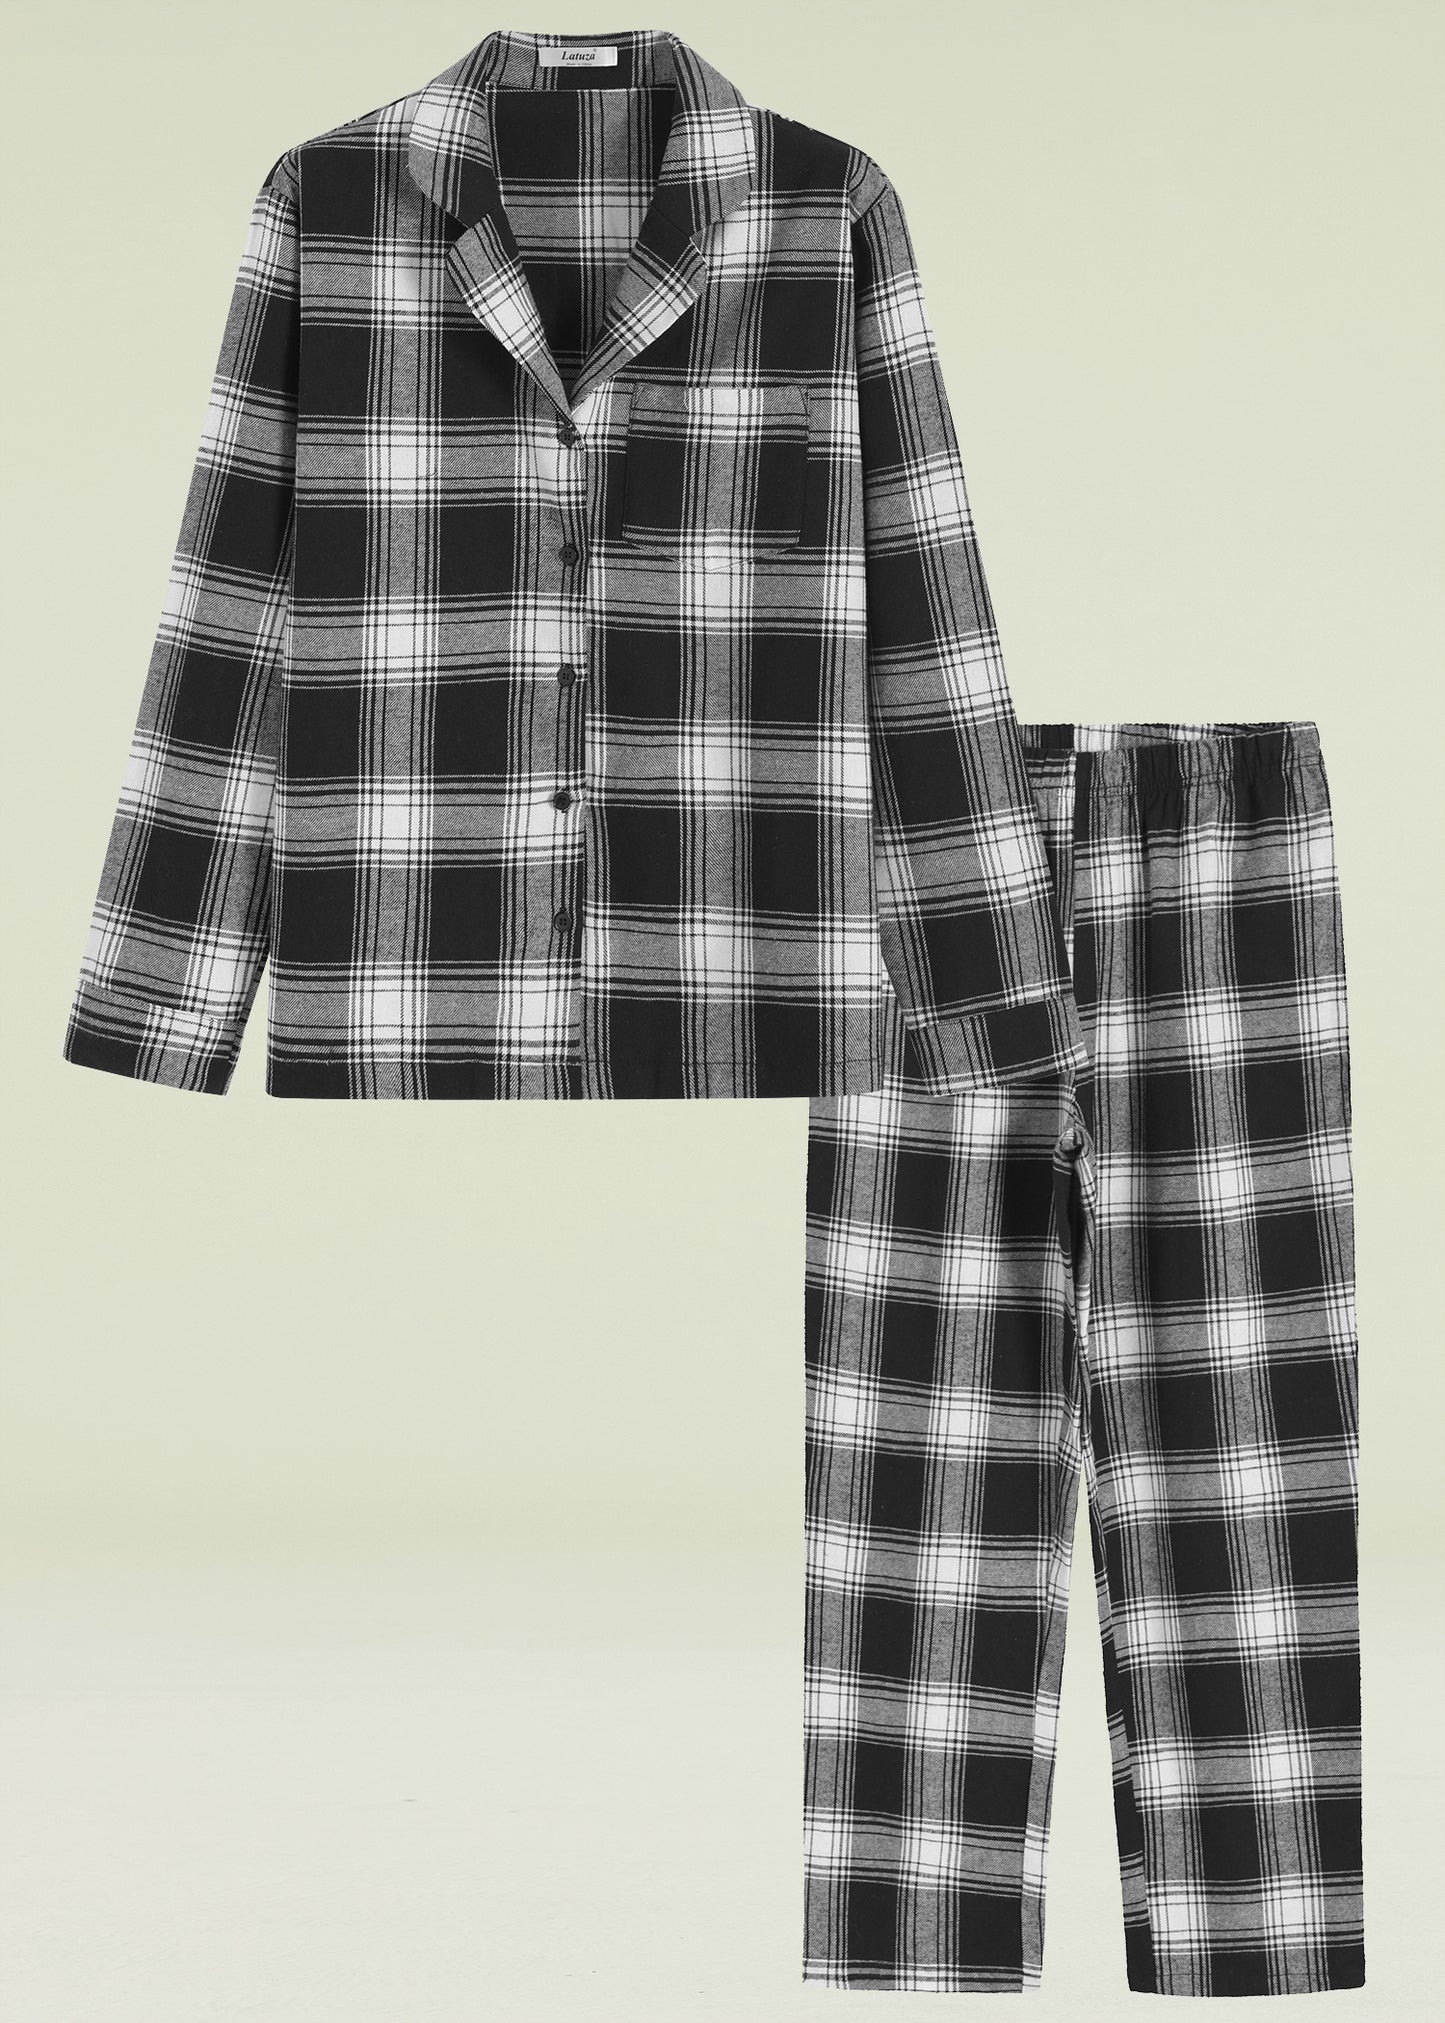 Women's Cotton Flannel Pajamas Shirt and Pants with Pockets